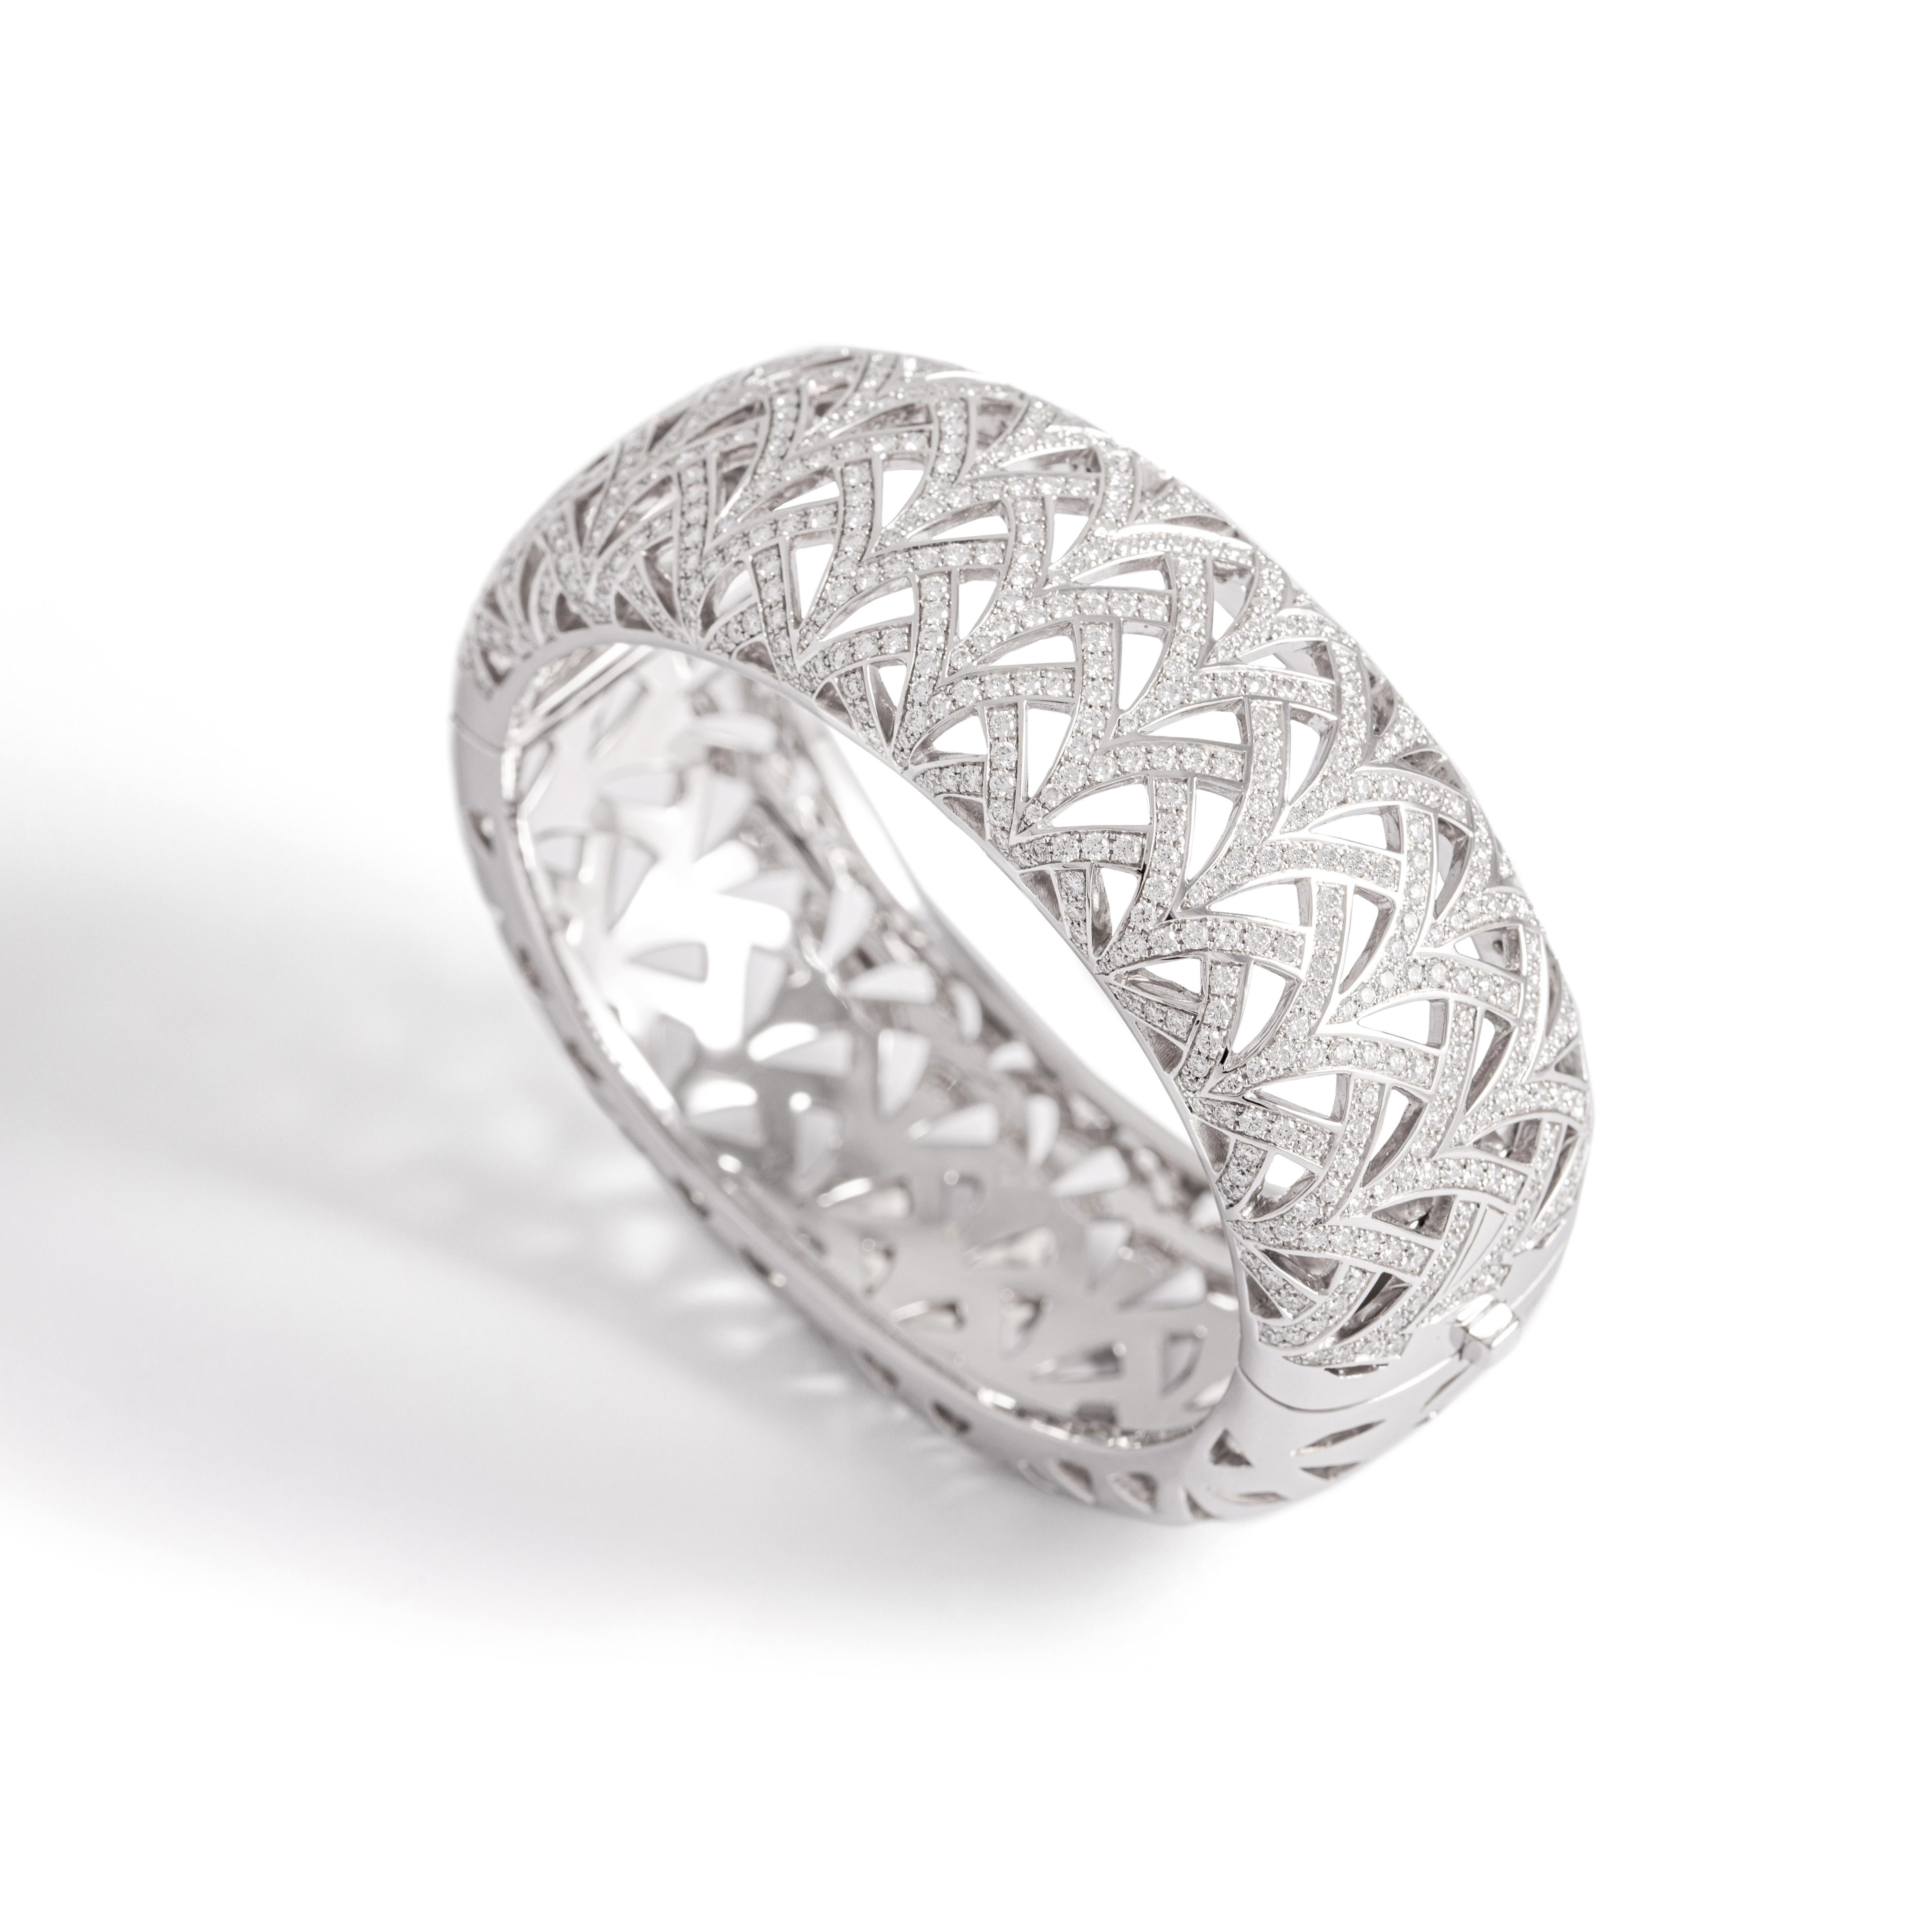 Bangle in 18kt white gold set with 554 diamonds 6.12 carats.
Inner circumference: Approximately 15.70 centimeters ( 6.18 inches).

Total weight: 111.52 grams.
Width on the top: 2.50 centimeters ( 0.98 inches).
